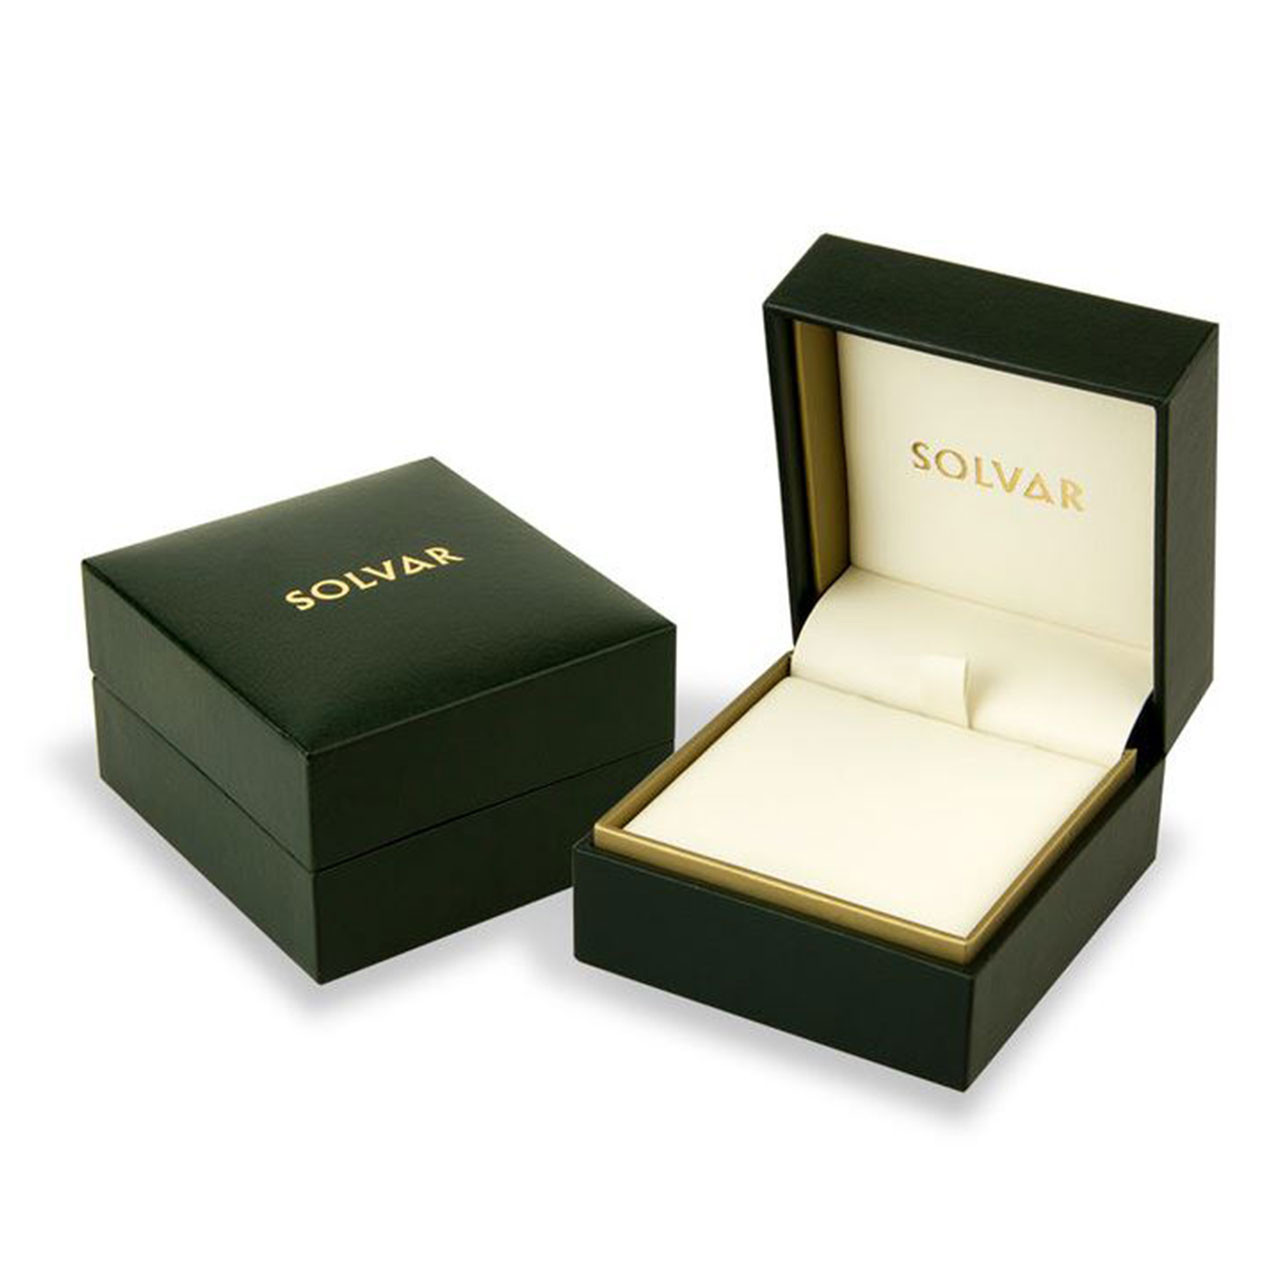 The box the Éireloom 14K Gold Claddagh Earrings come in